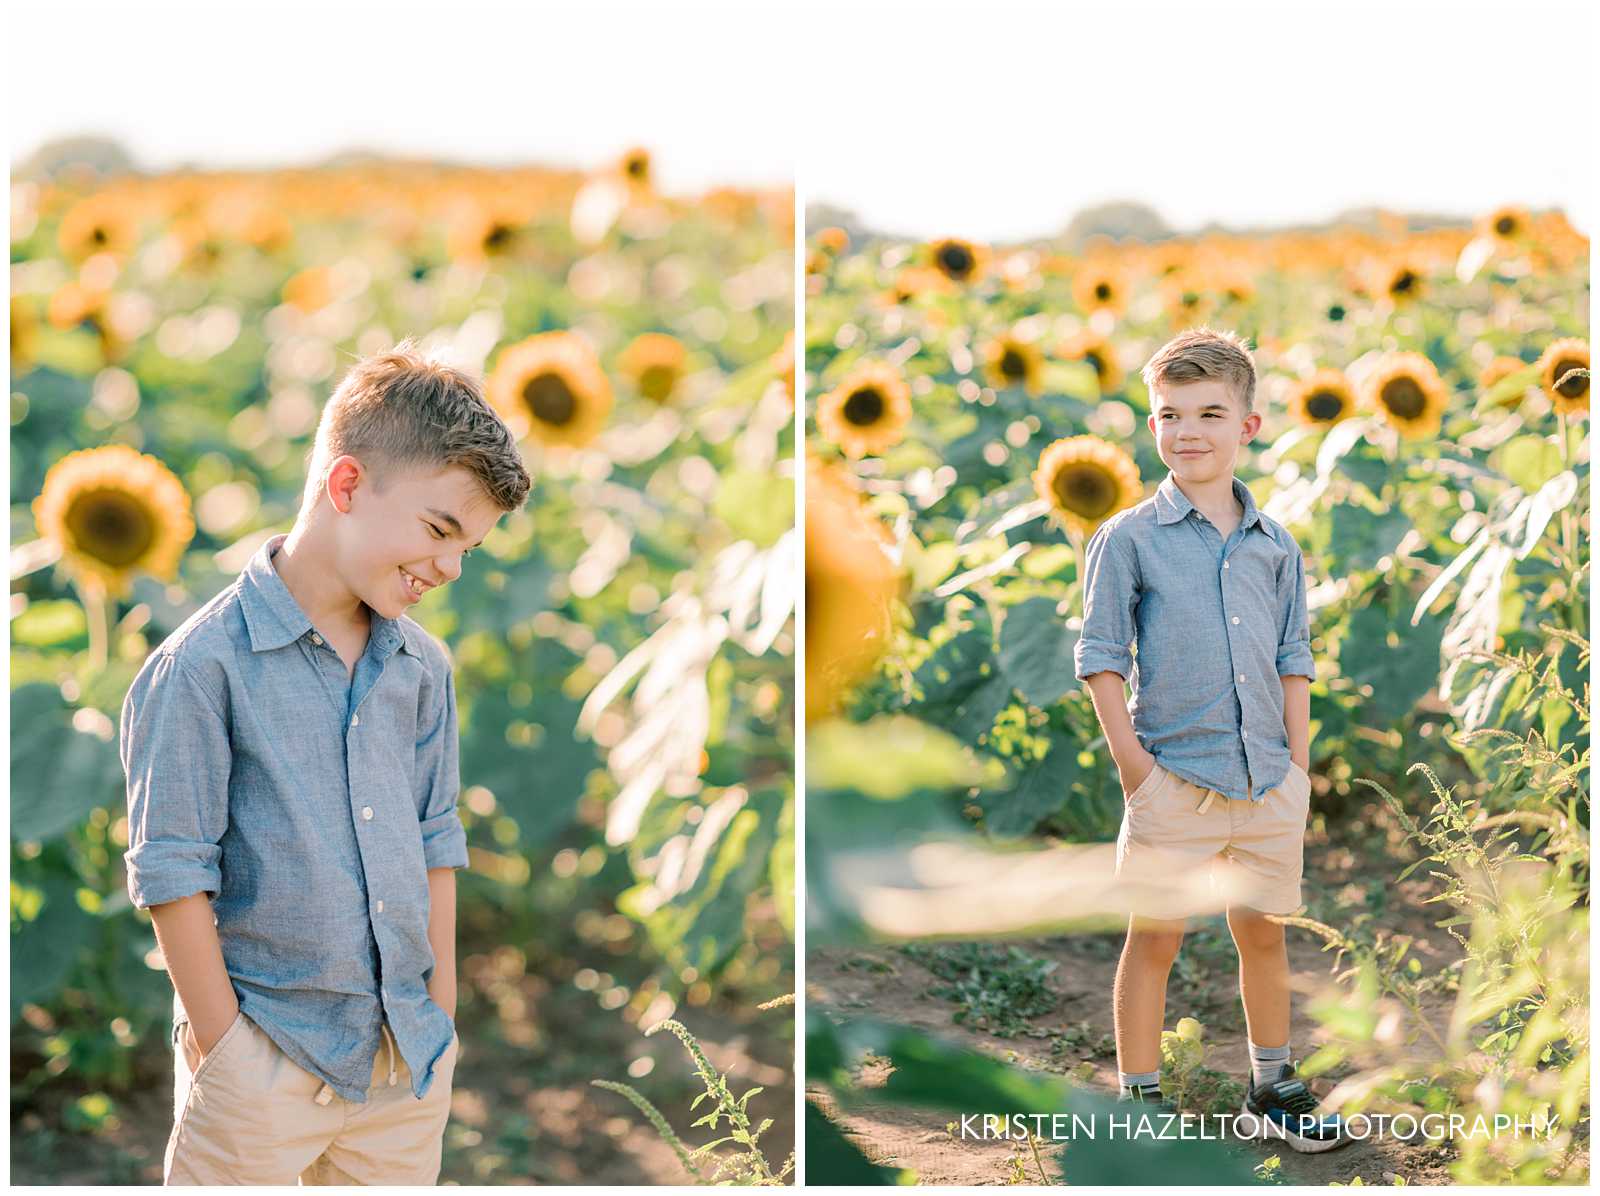 Sunflower photos with a young boy wearing a blue shirt in a field in Maple Park, IL